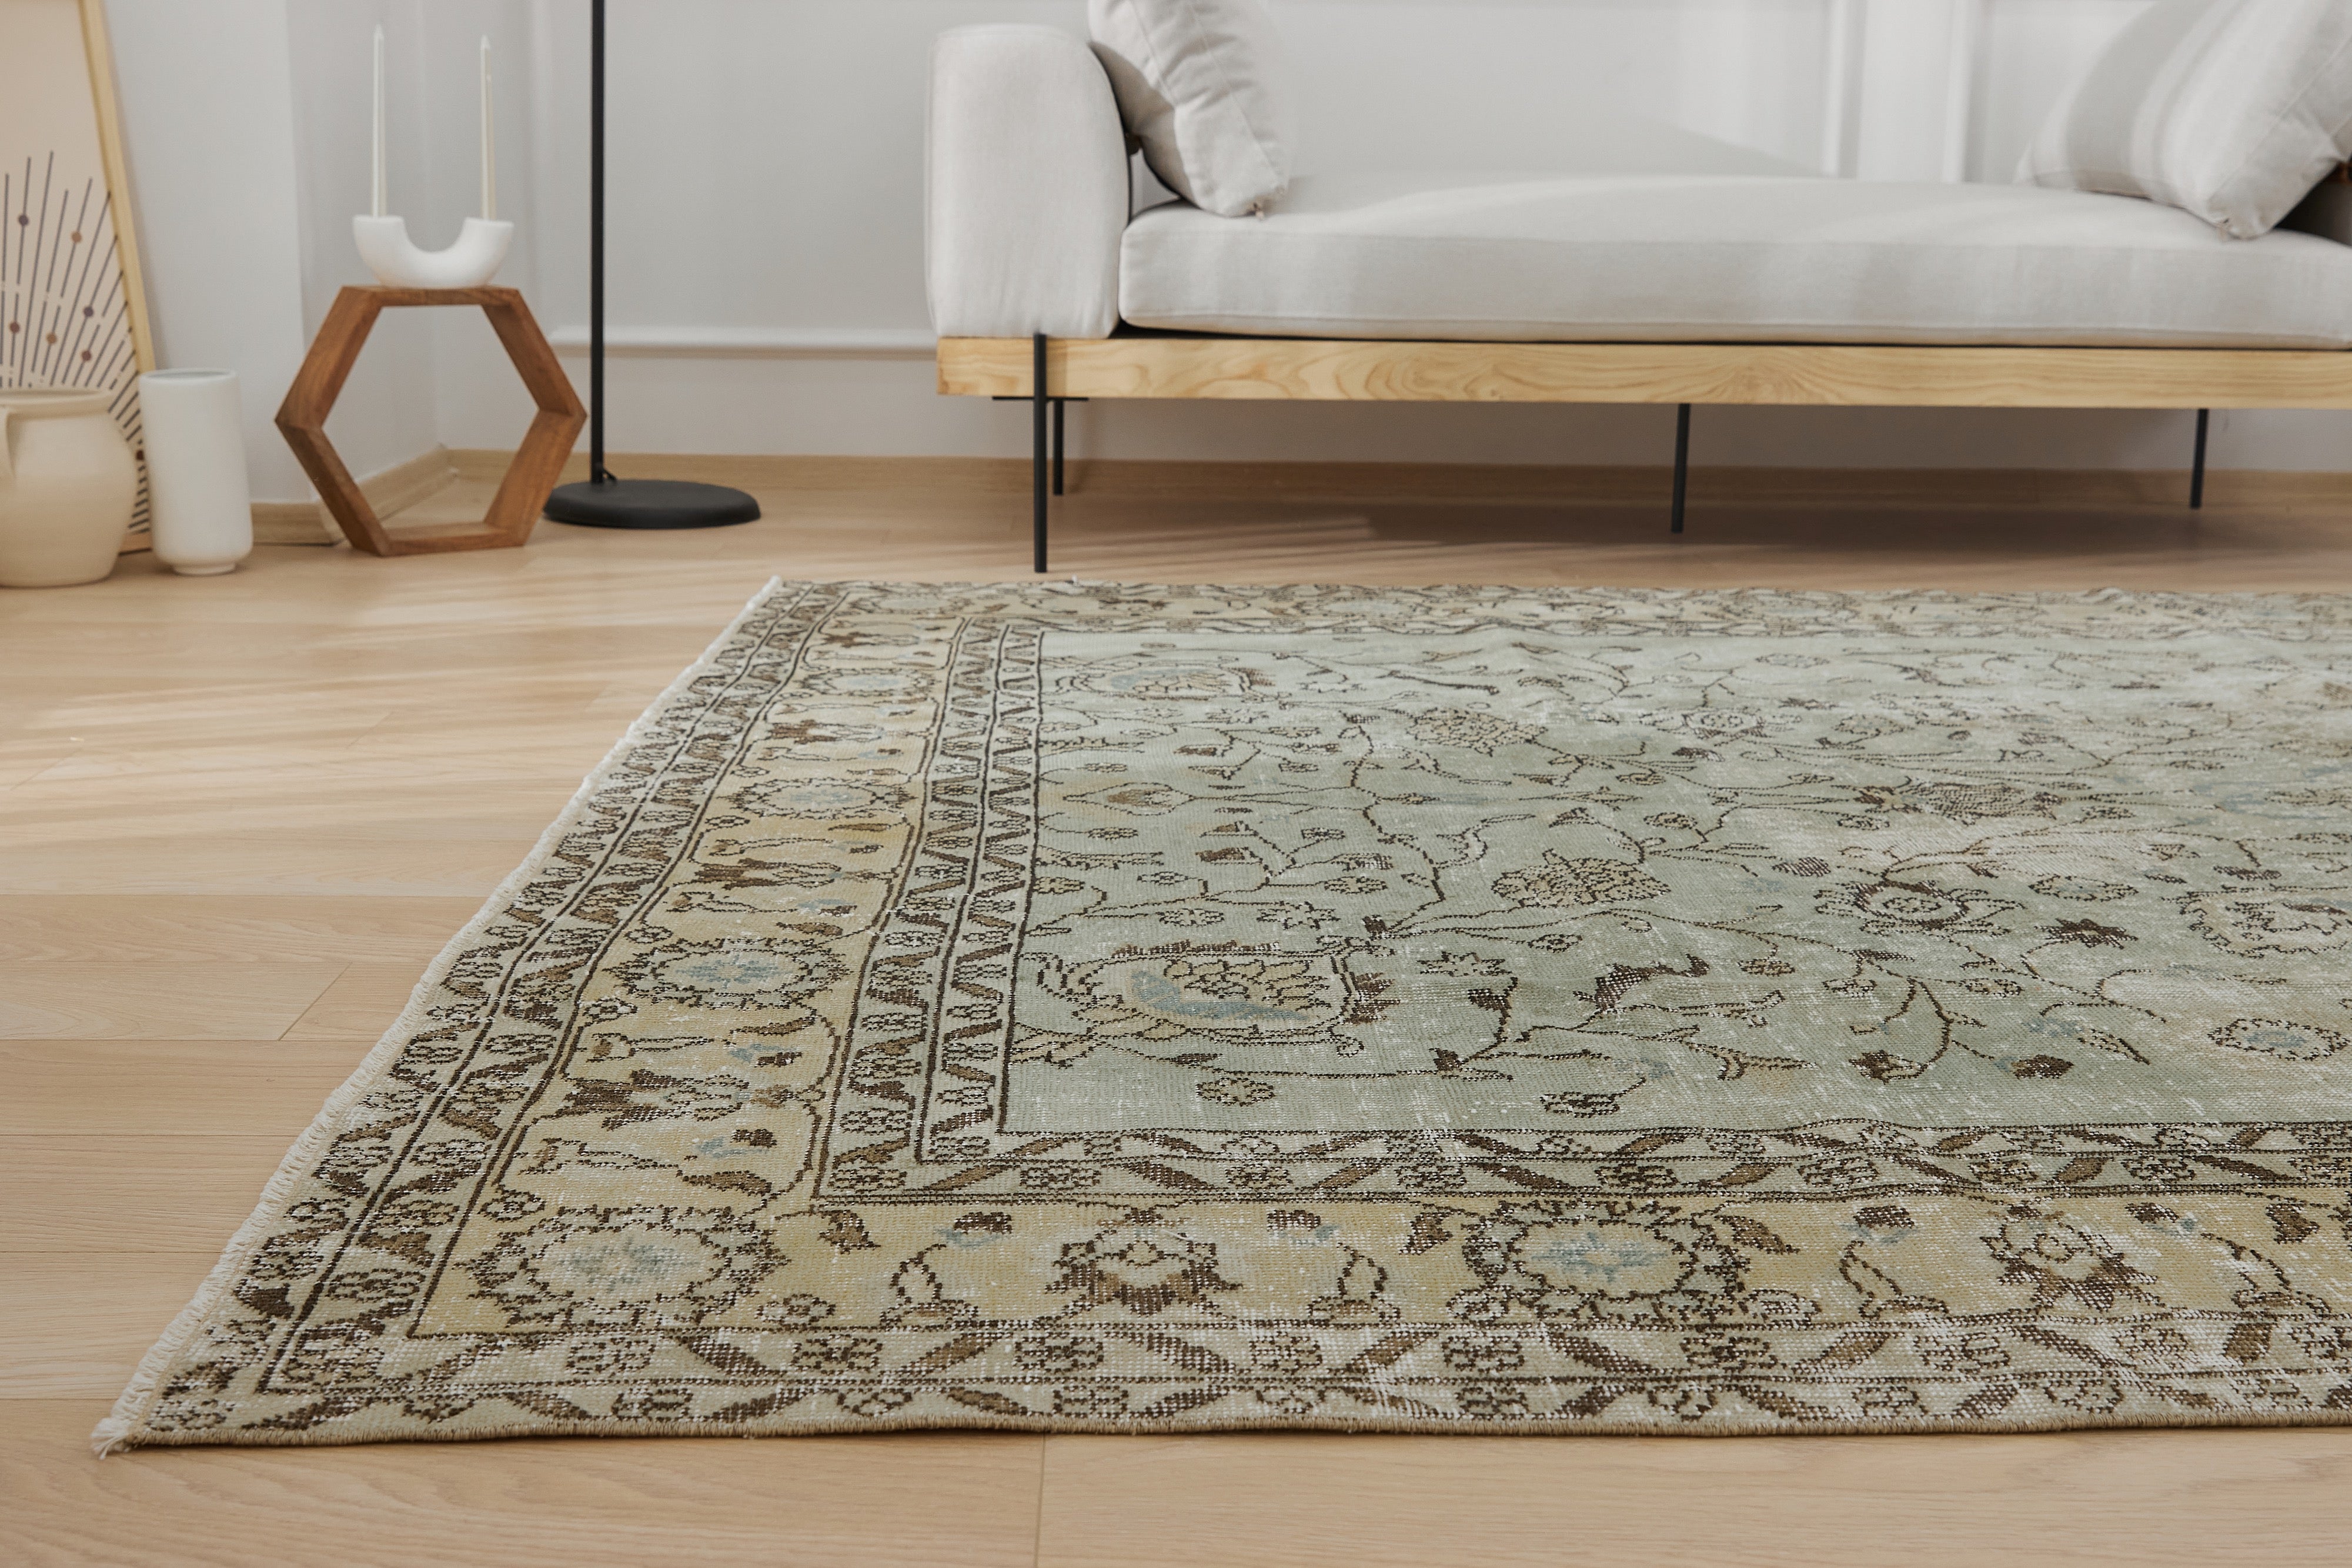 Taniye's Essence | Authentic Turkish Rug | Hand-Knotted Carpet | Kuden Rugs